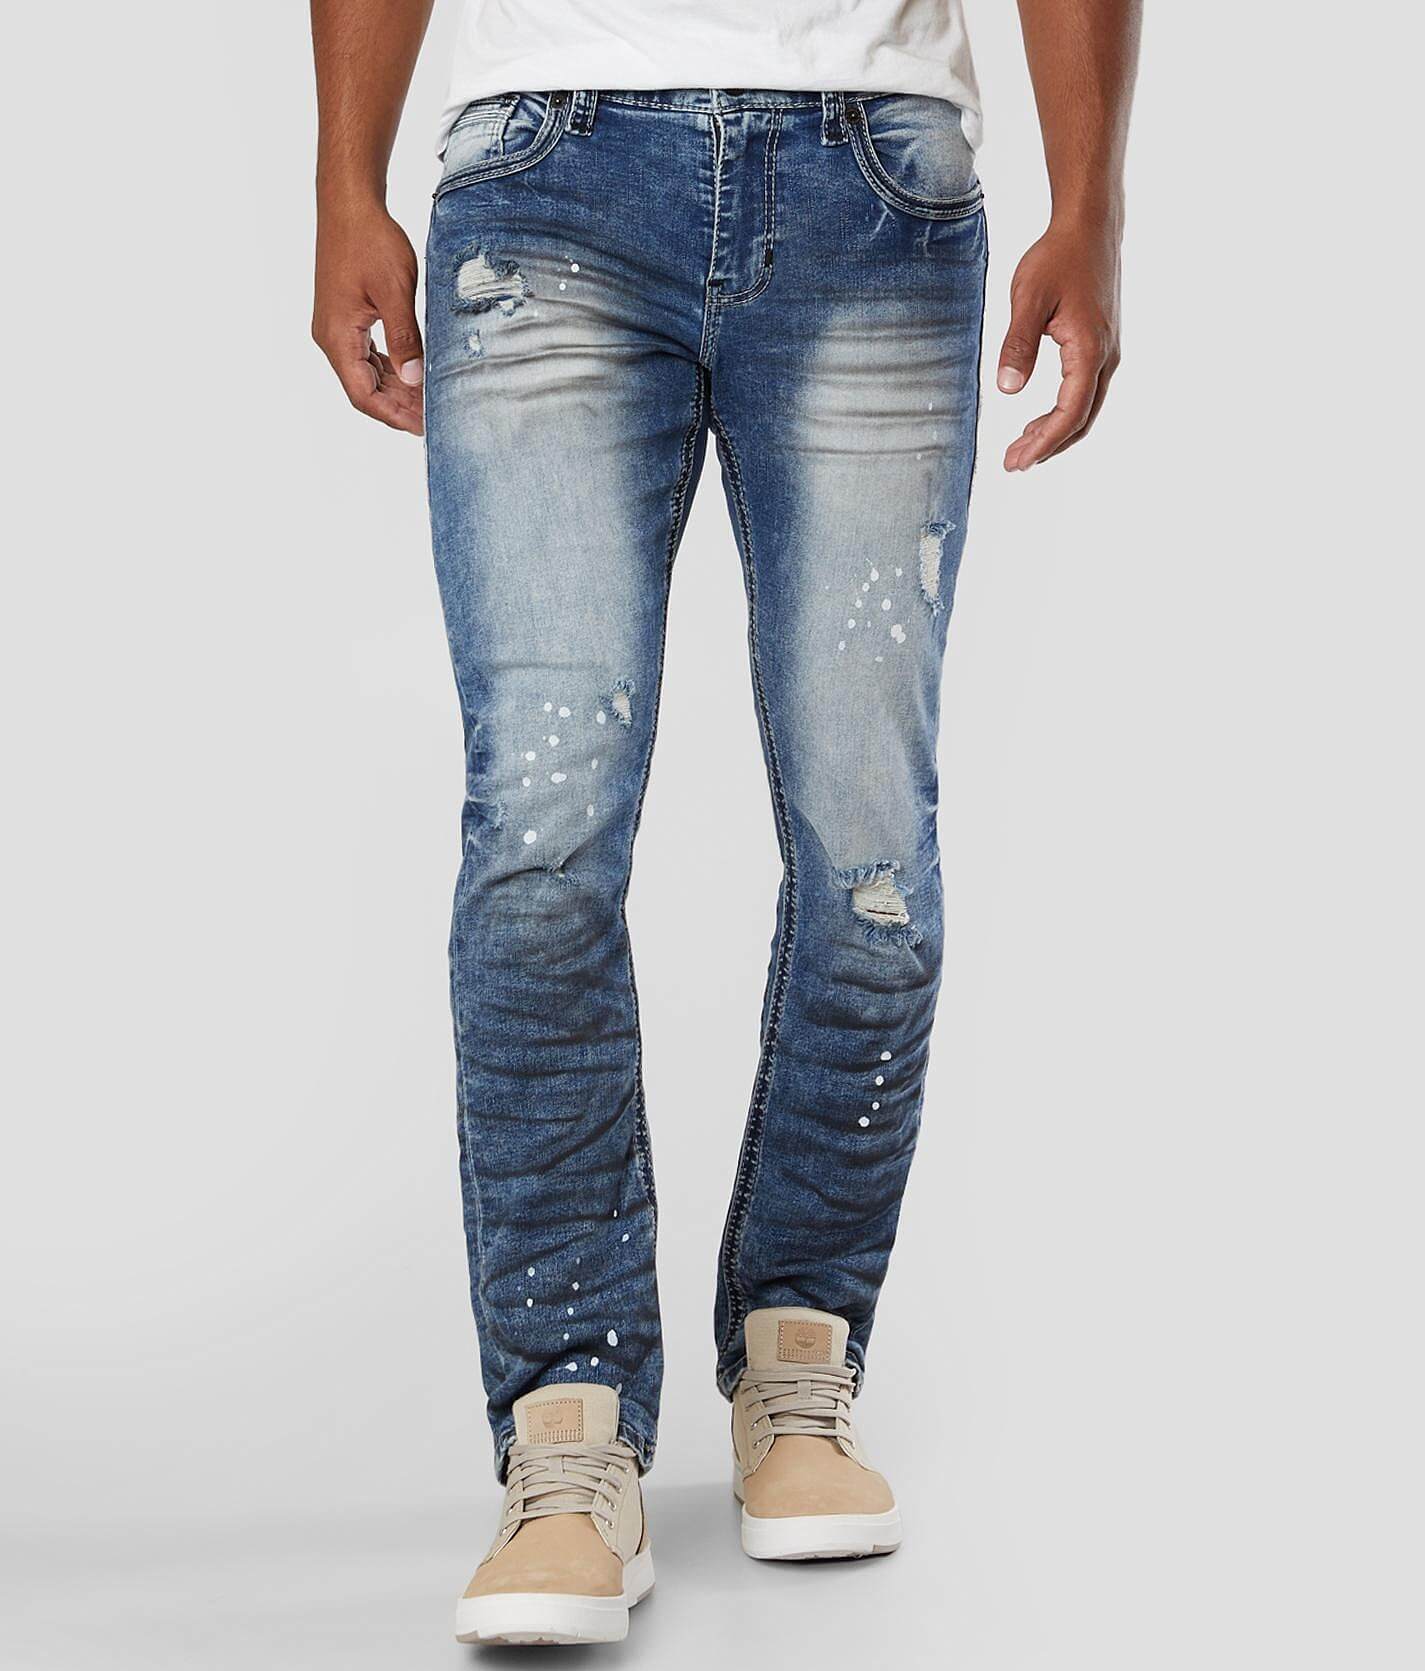 american fighter jeans cheap